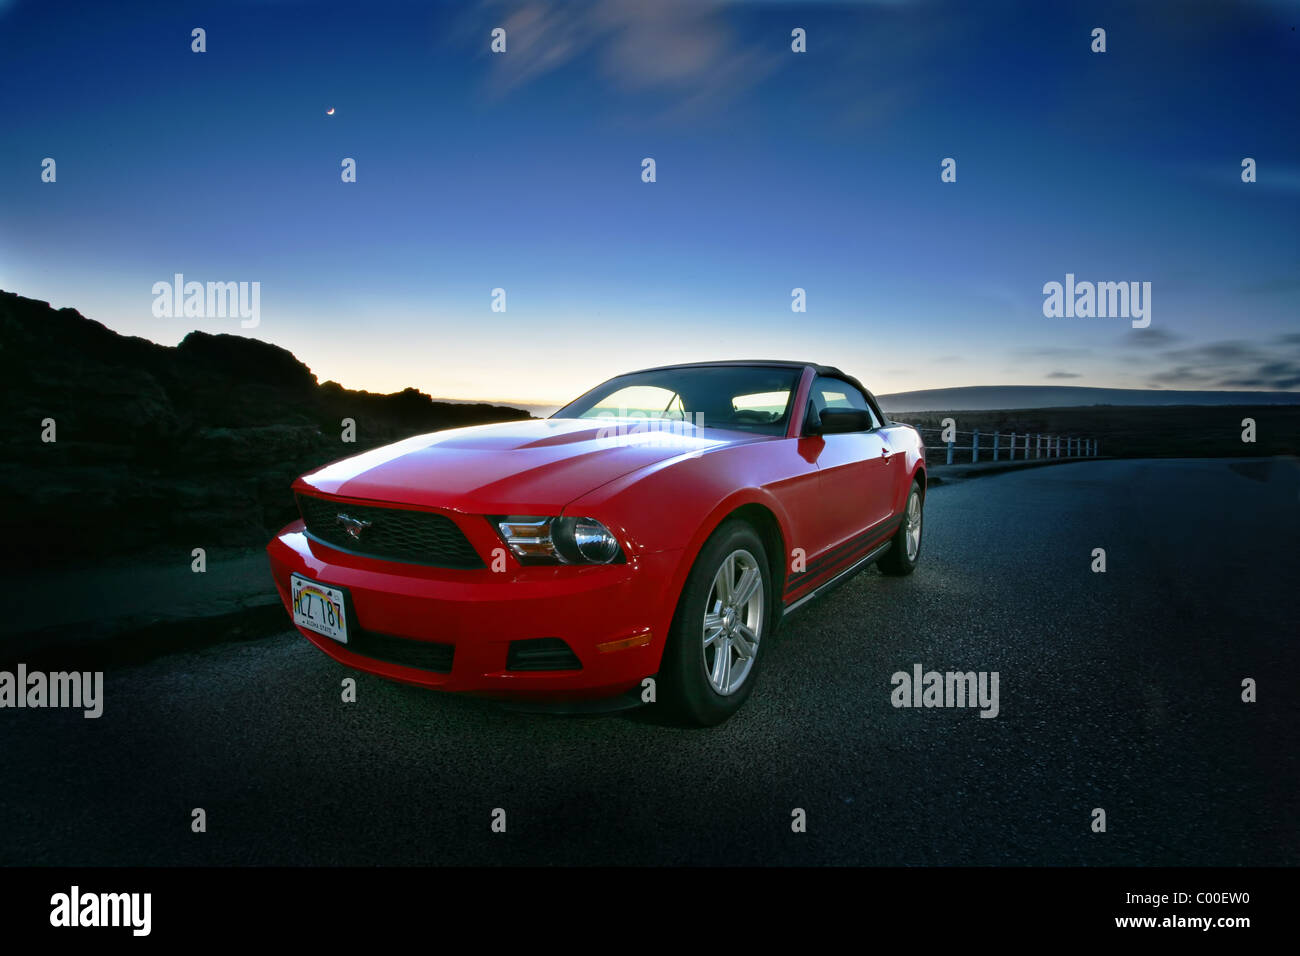 A red Ford Mustang rental car at night in Hawaii Stock Photo